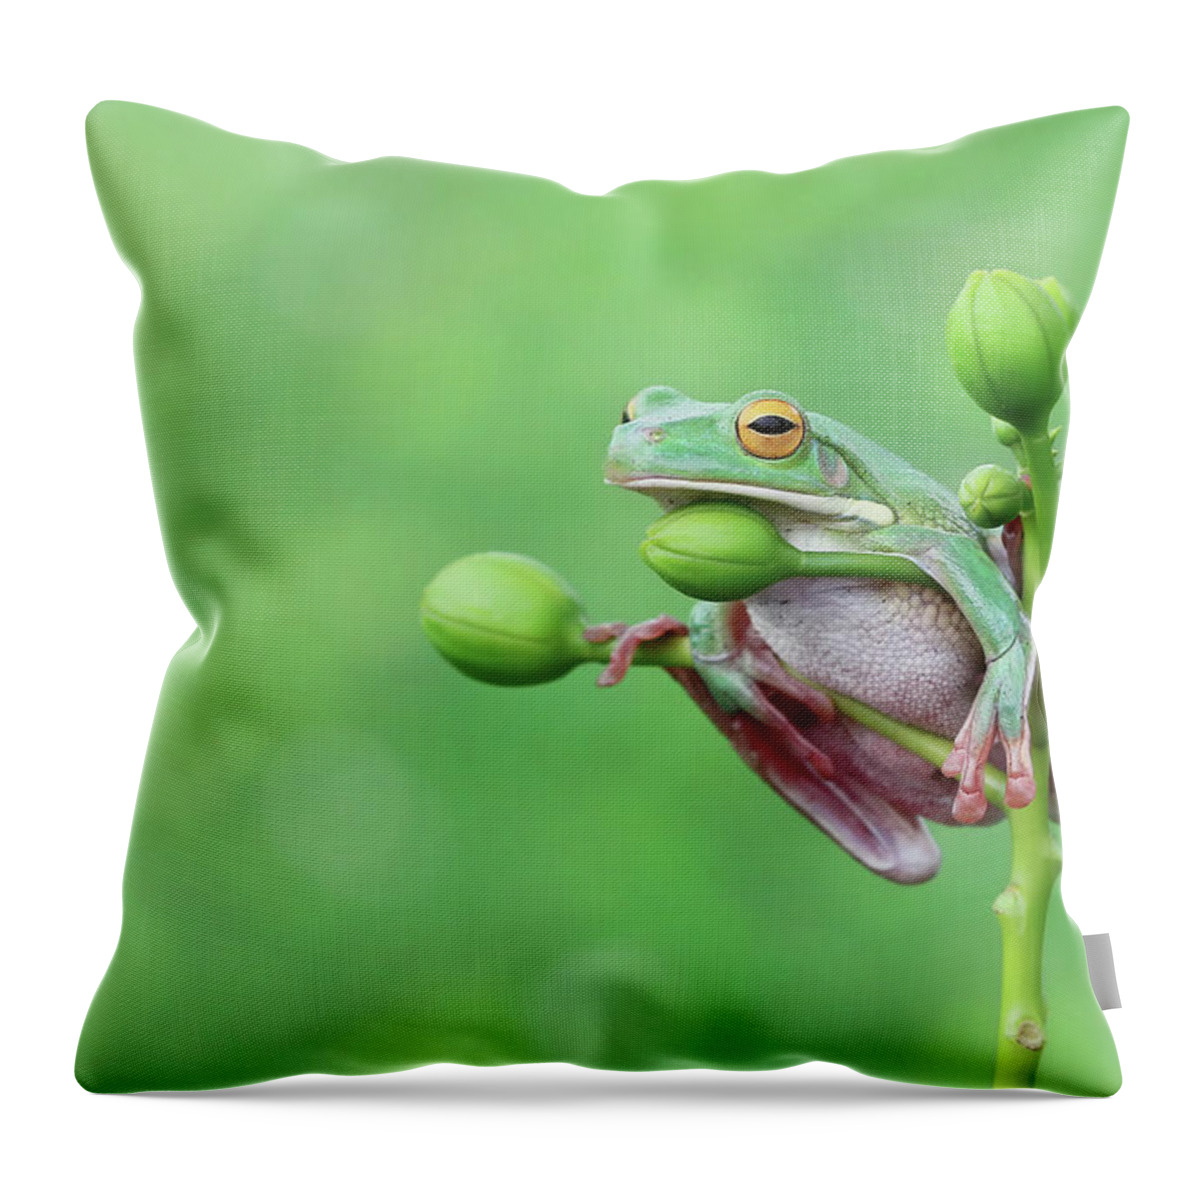 Animal Themes Throw Pillow featuring the photograph Tree Frog Sitting On A Plant, Indonesia by Kuritafsheen